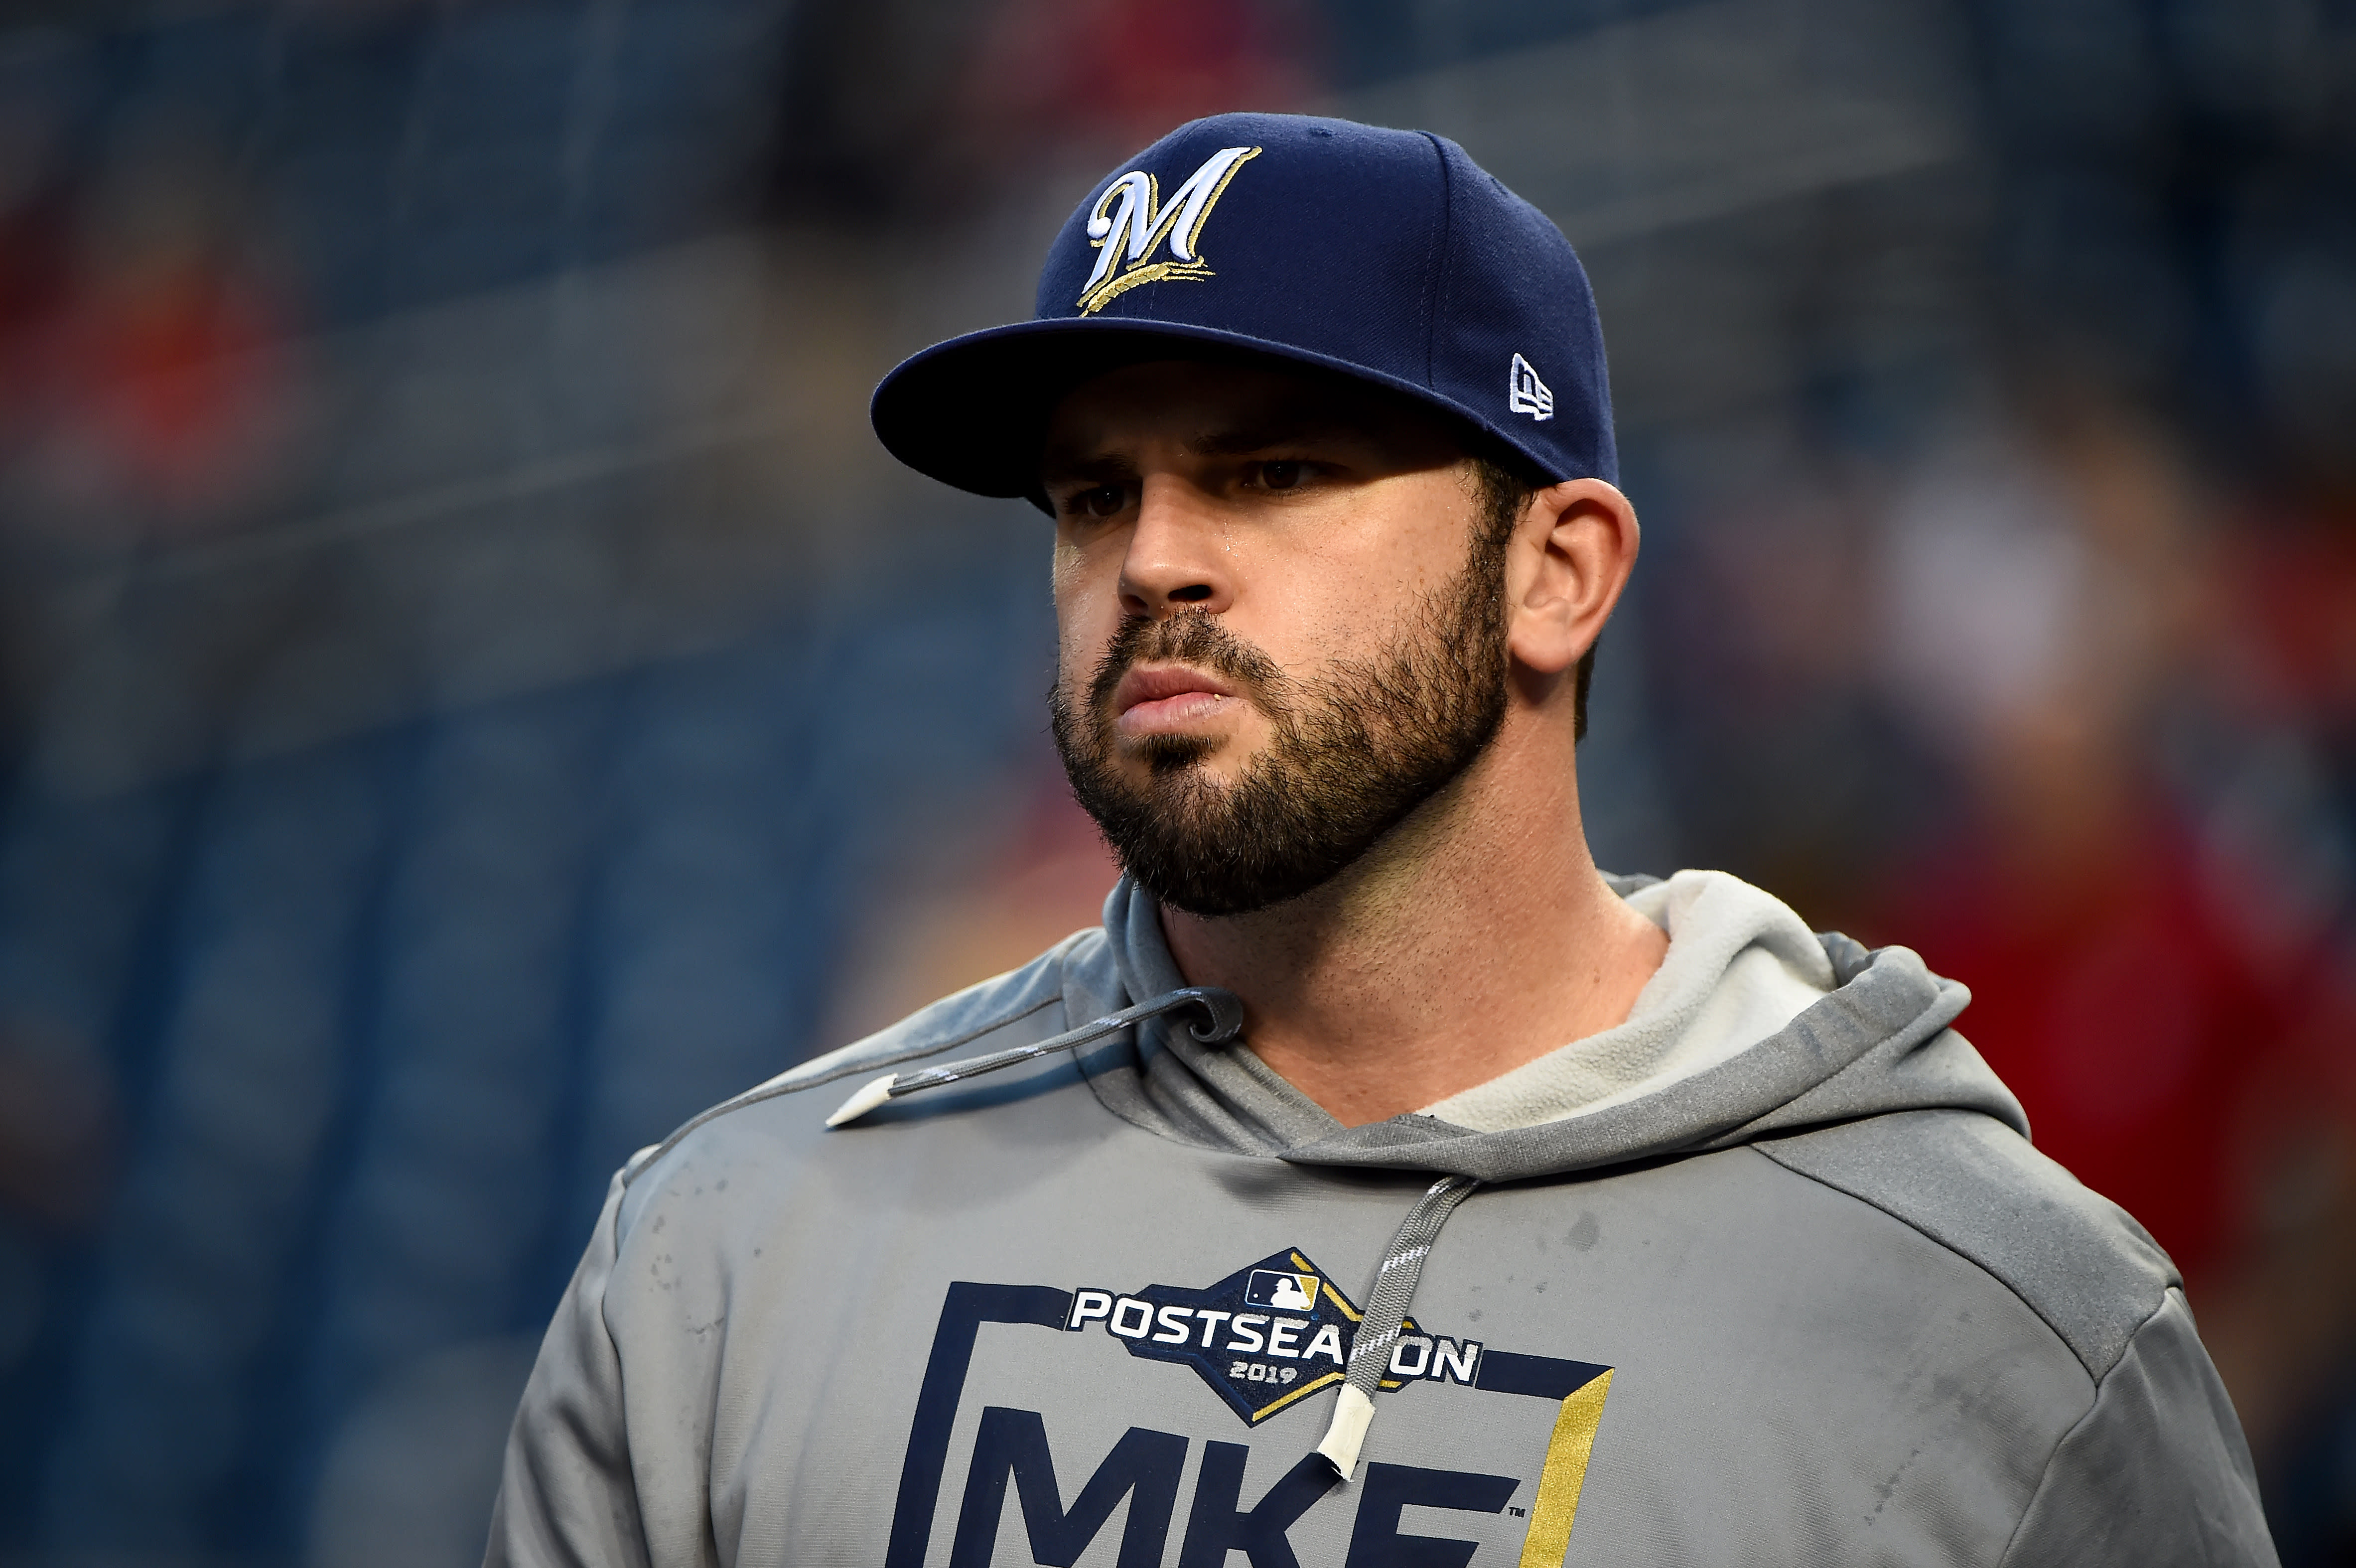 MLB Reds sign Mike Moustakas to 4year deal; will play 2B